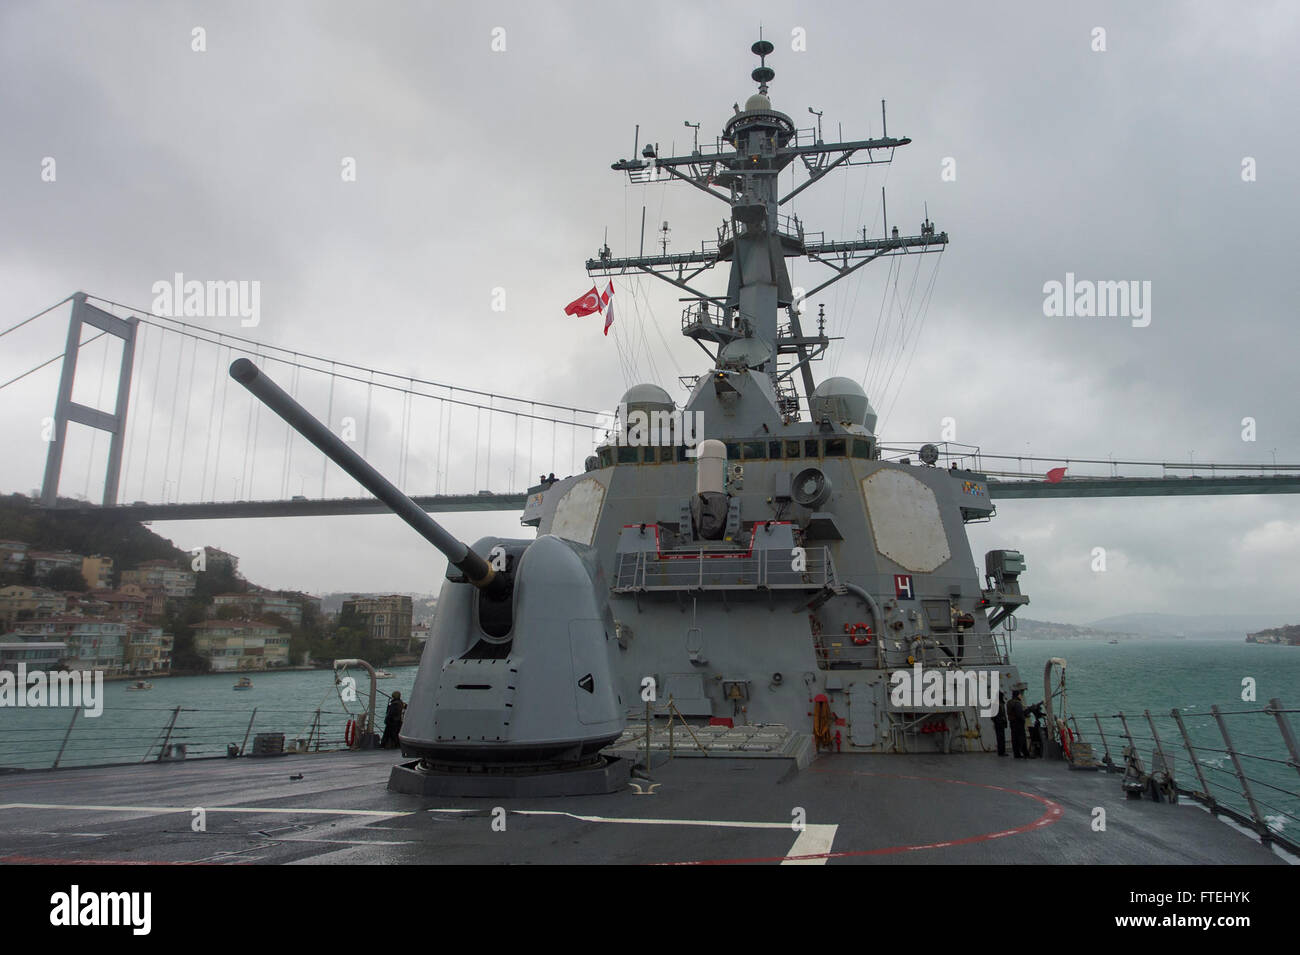 BOSPHORUS STRAIT (Oct. 30, 2014) – The Arleigh Burke-class guided-missile destroyer USS Cole (DDG 67) passes under the Fatih Sultan Mehmet bridge while transiting the Bosphorus Strait en route to the Aegean Sea. Cole, homeported in Norfolk, Va., is conducting naval operations in the U.S. 6th Fleet area of operations in support of U.S. national security interests in Europe Stock Photo